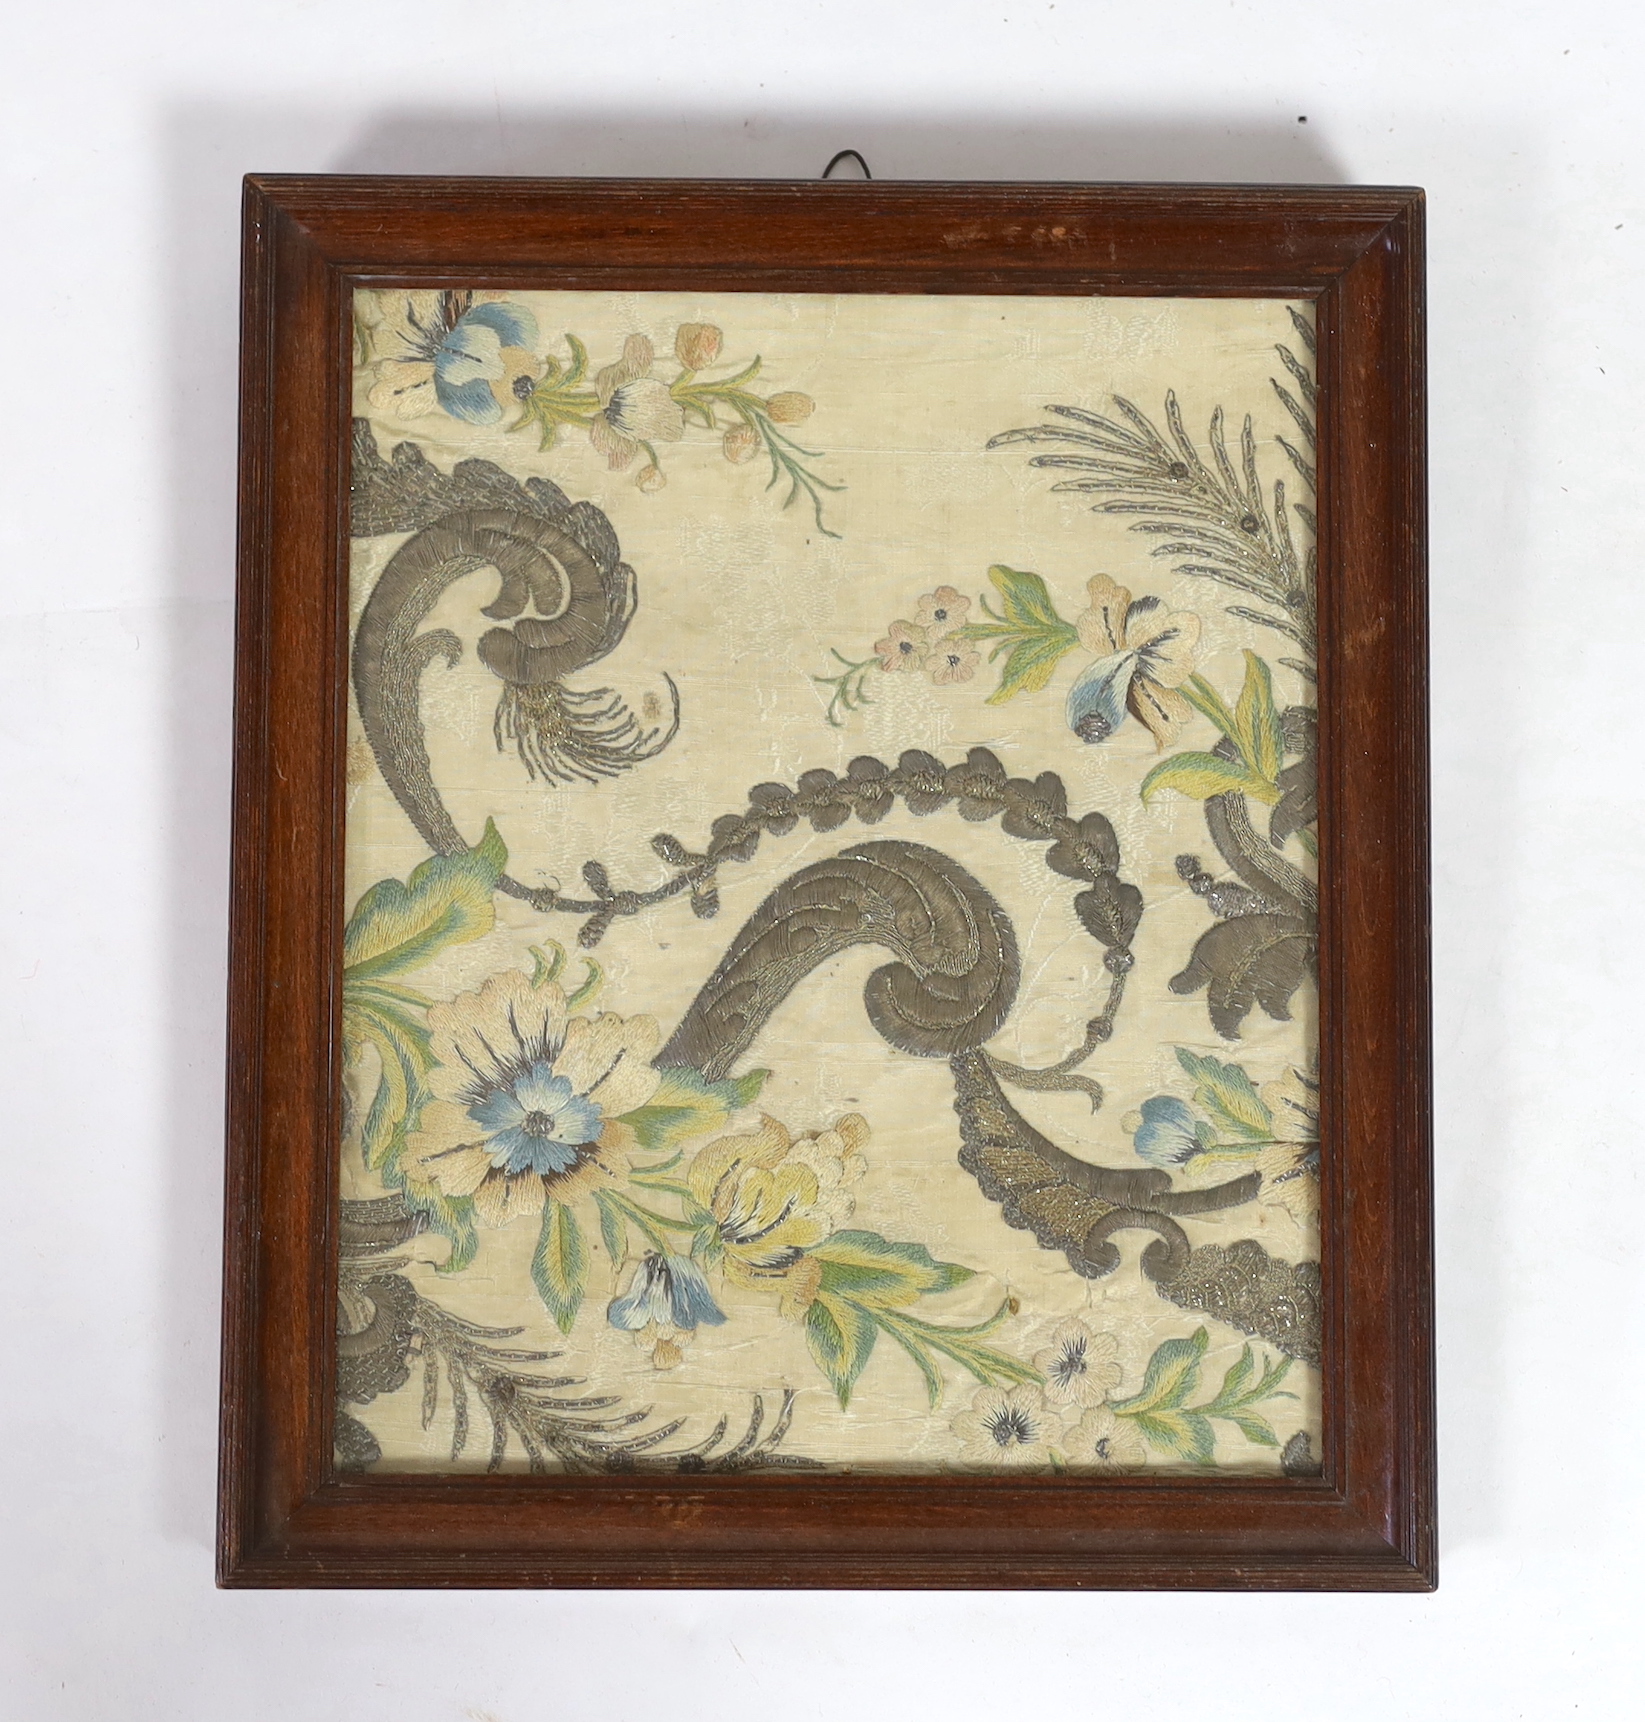 A framed 18th century French silk damask embroidered panel possibly a fragment from Chasuble or similar religious garment. Embroidered in floral and scrolling design, using polychrome silks and metallic threads, 27cm x 2